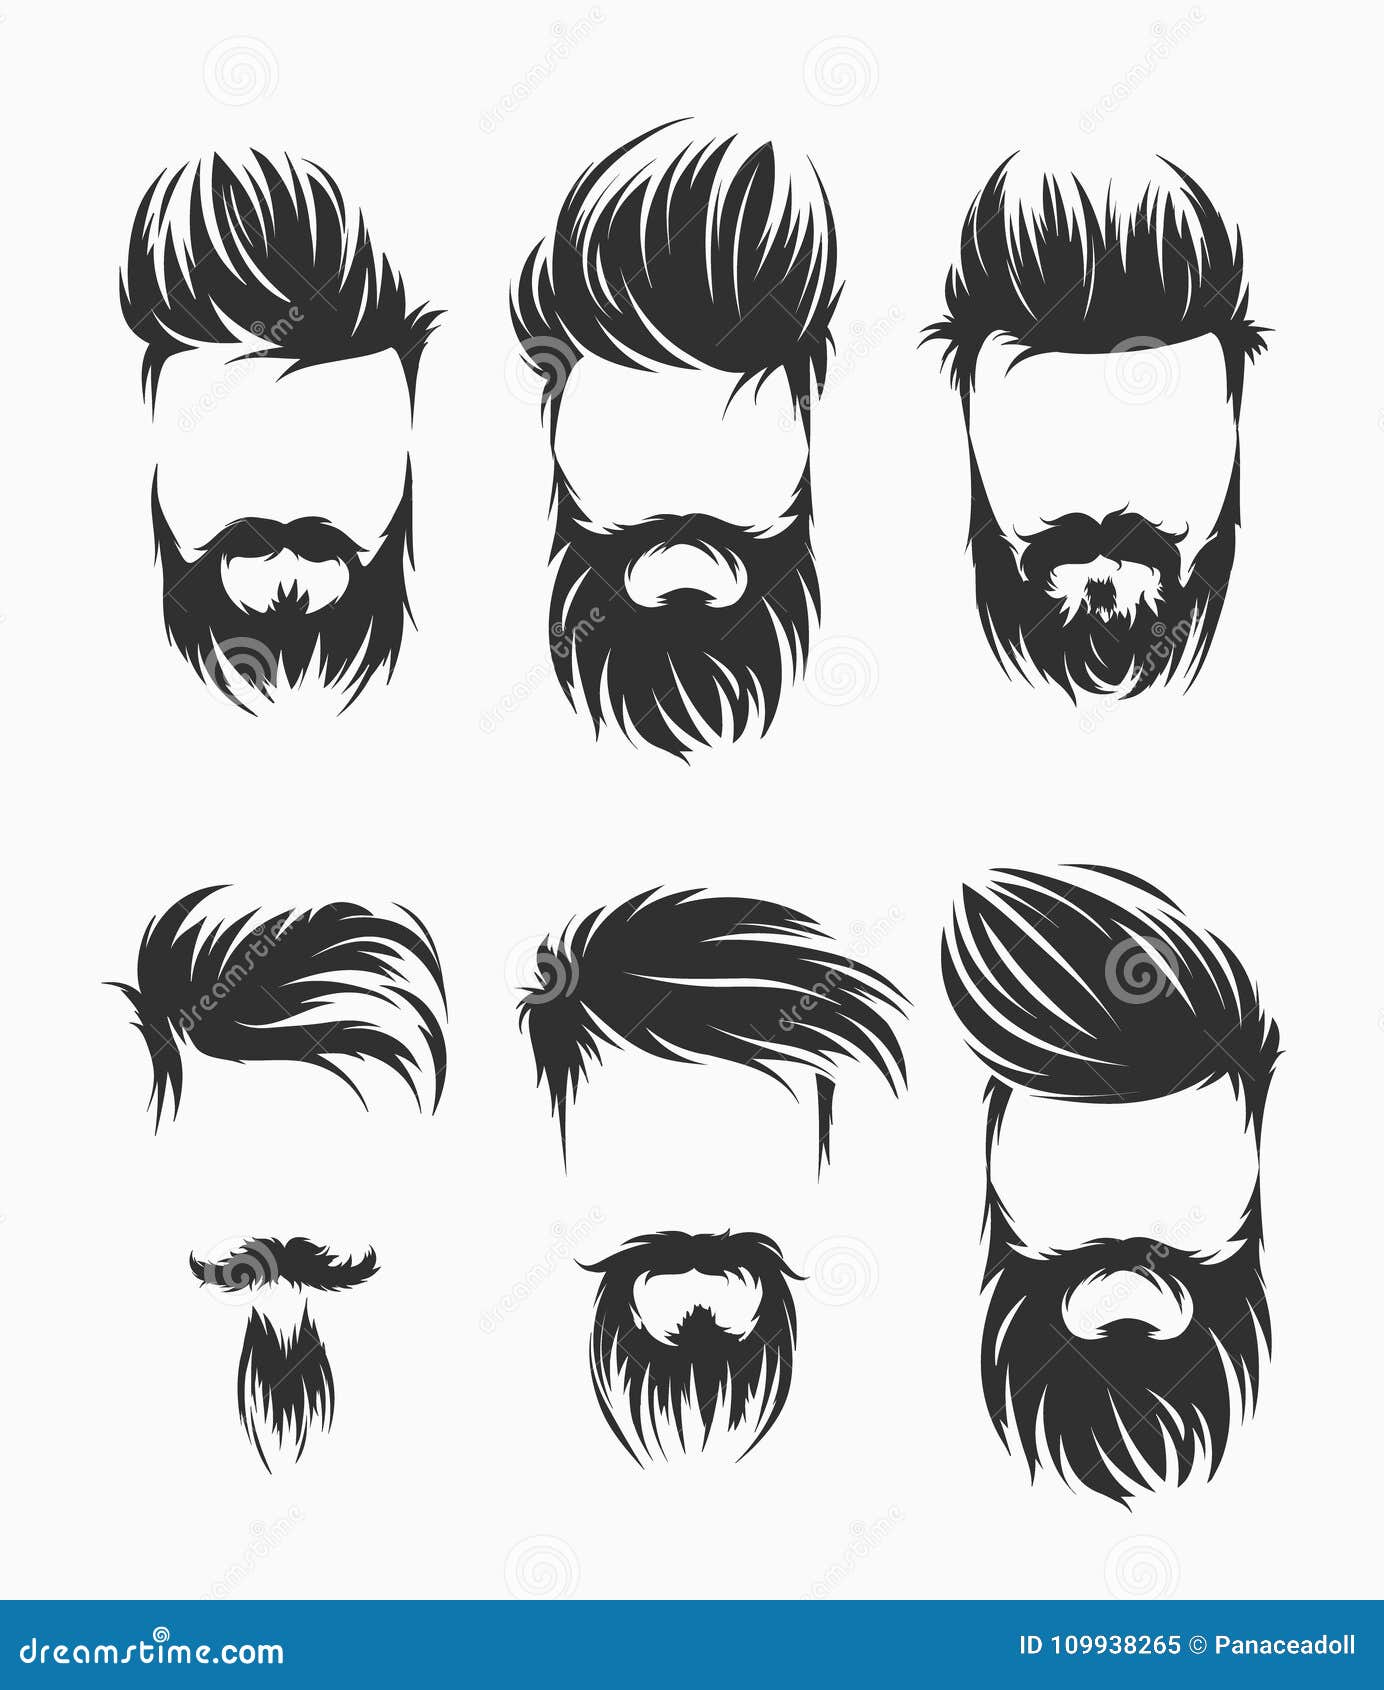 4 Facial Hairstyles That Will Accentuate Your Jawline - Style & Grooming